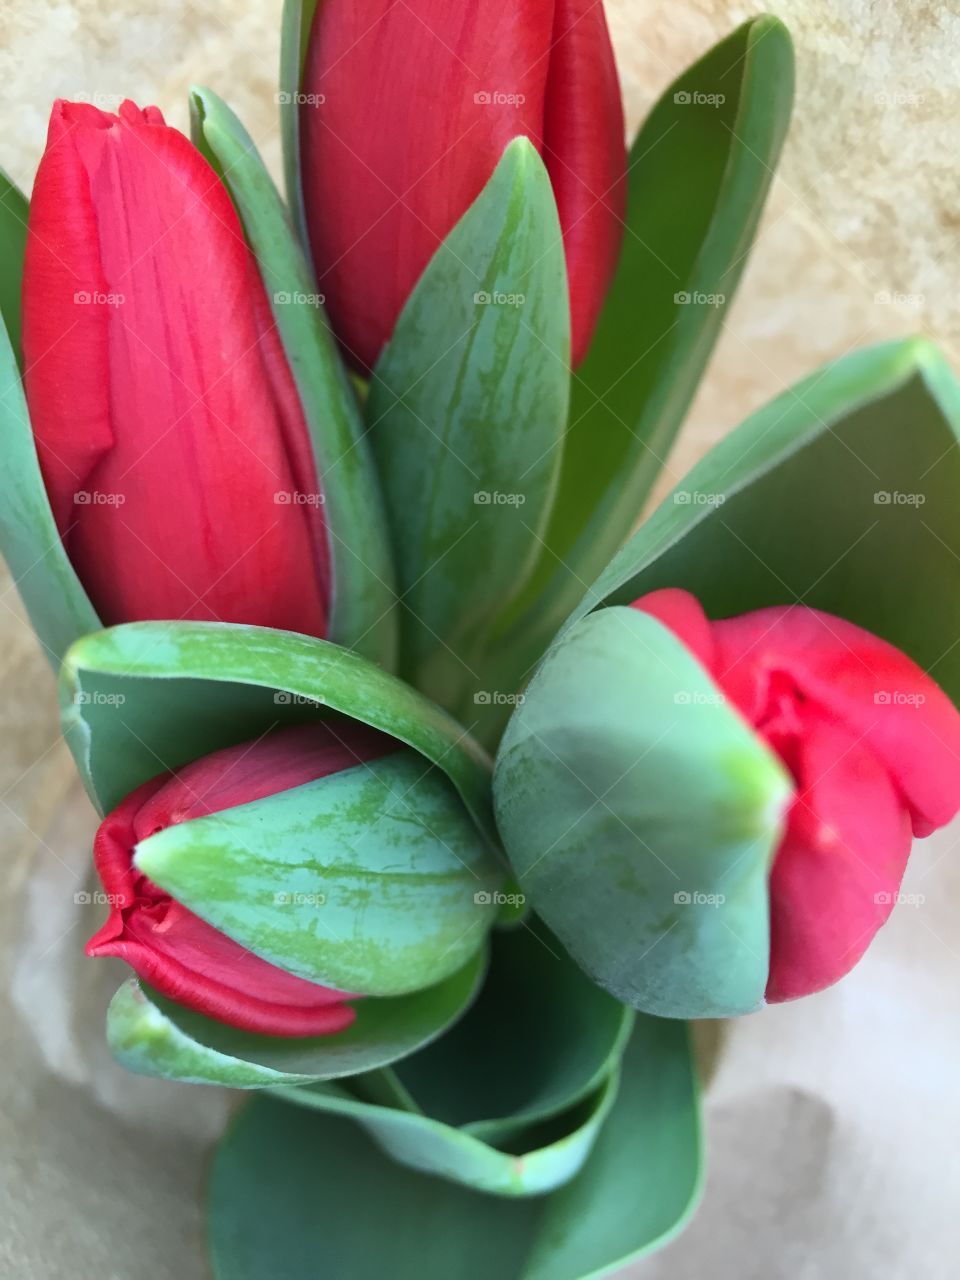 A Dutch Valentine's . Tulips bought at the farmer's market in Leiden, The Netherlands on Valentine's Day 2015.